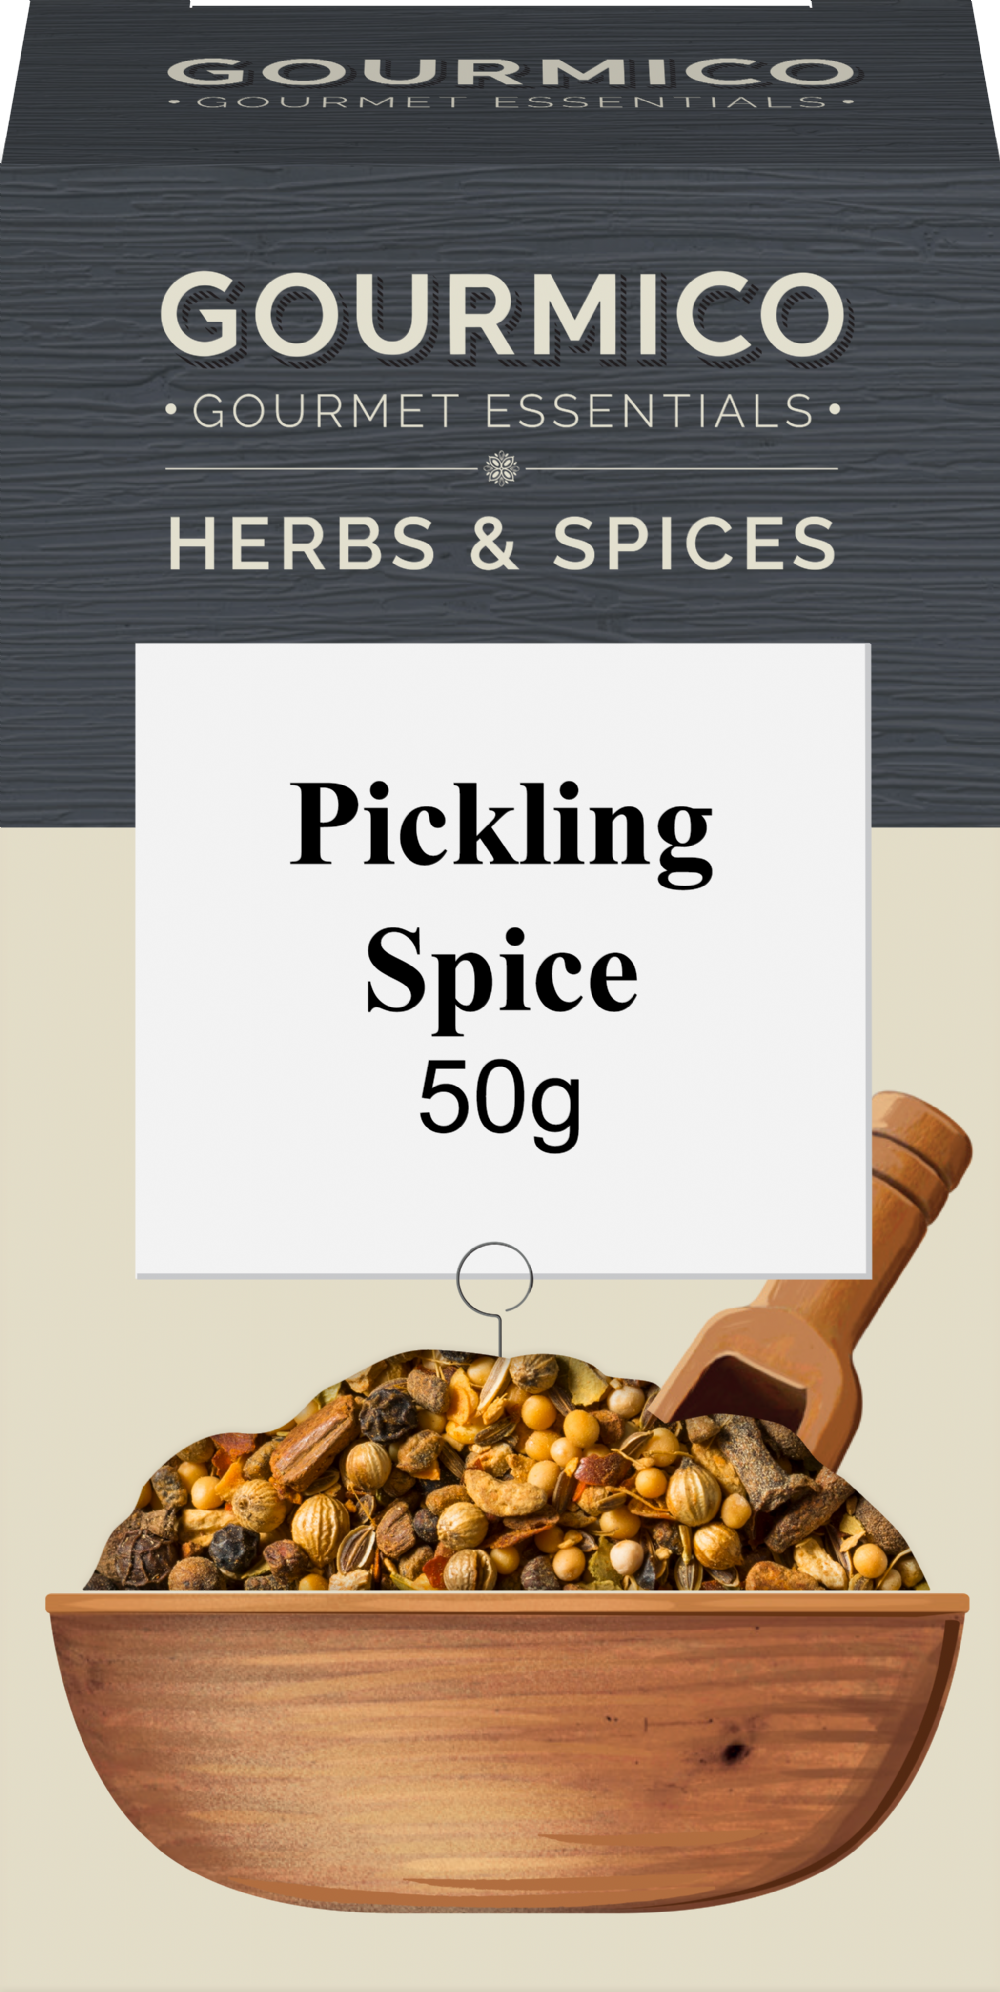 Spices and Seasonings - Page 3 of 3 - Giordano Garden Groceries